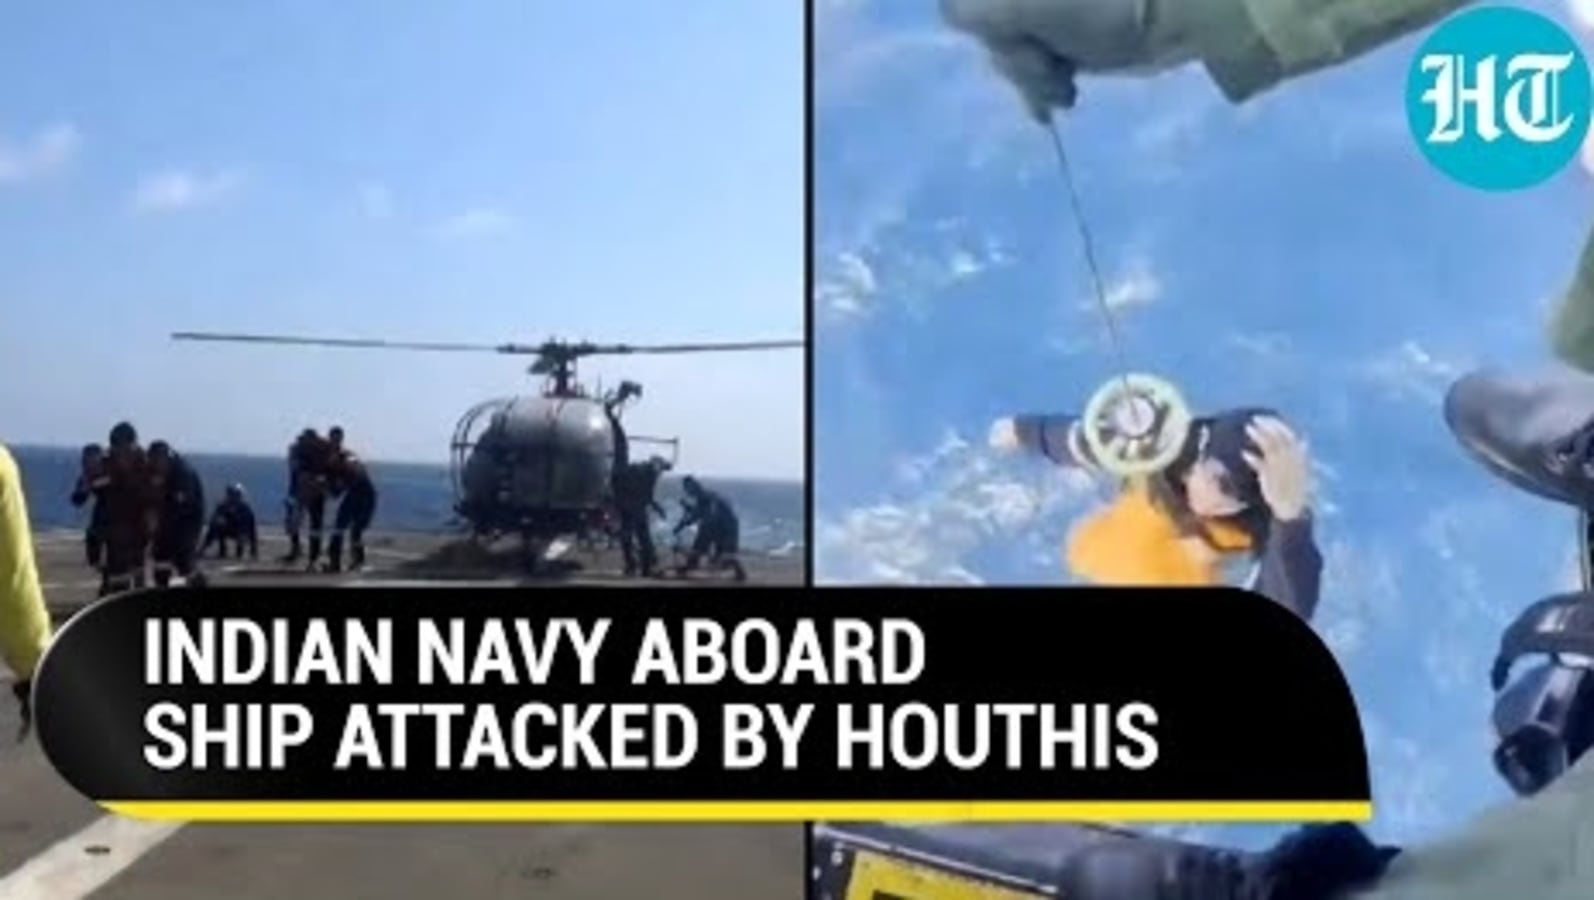 Indian Navy's Commando-Style Rescue Op After Houthi Attack In Gulf Of Aden | Red Sea Crisis